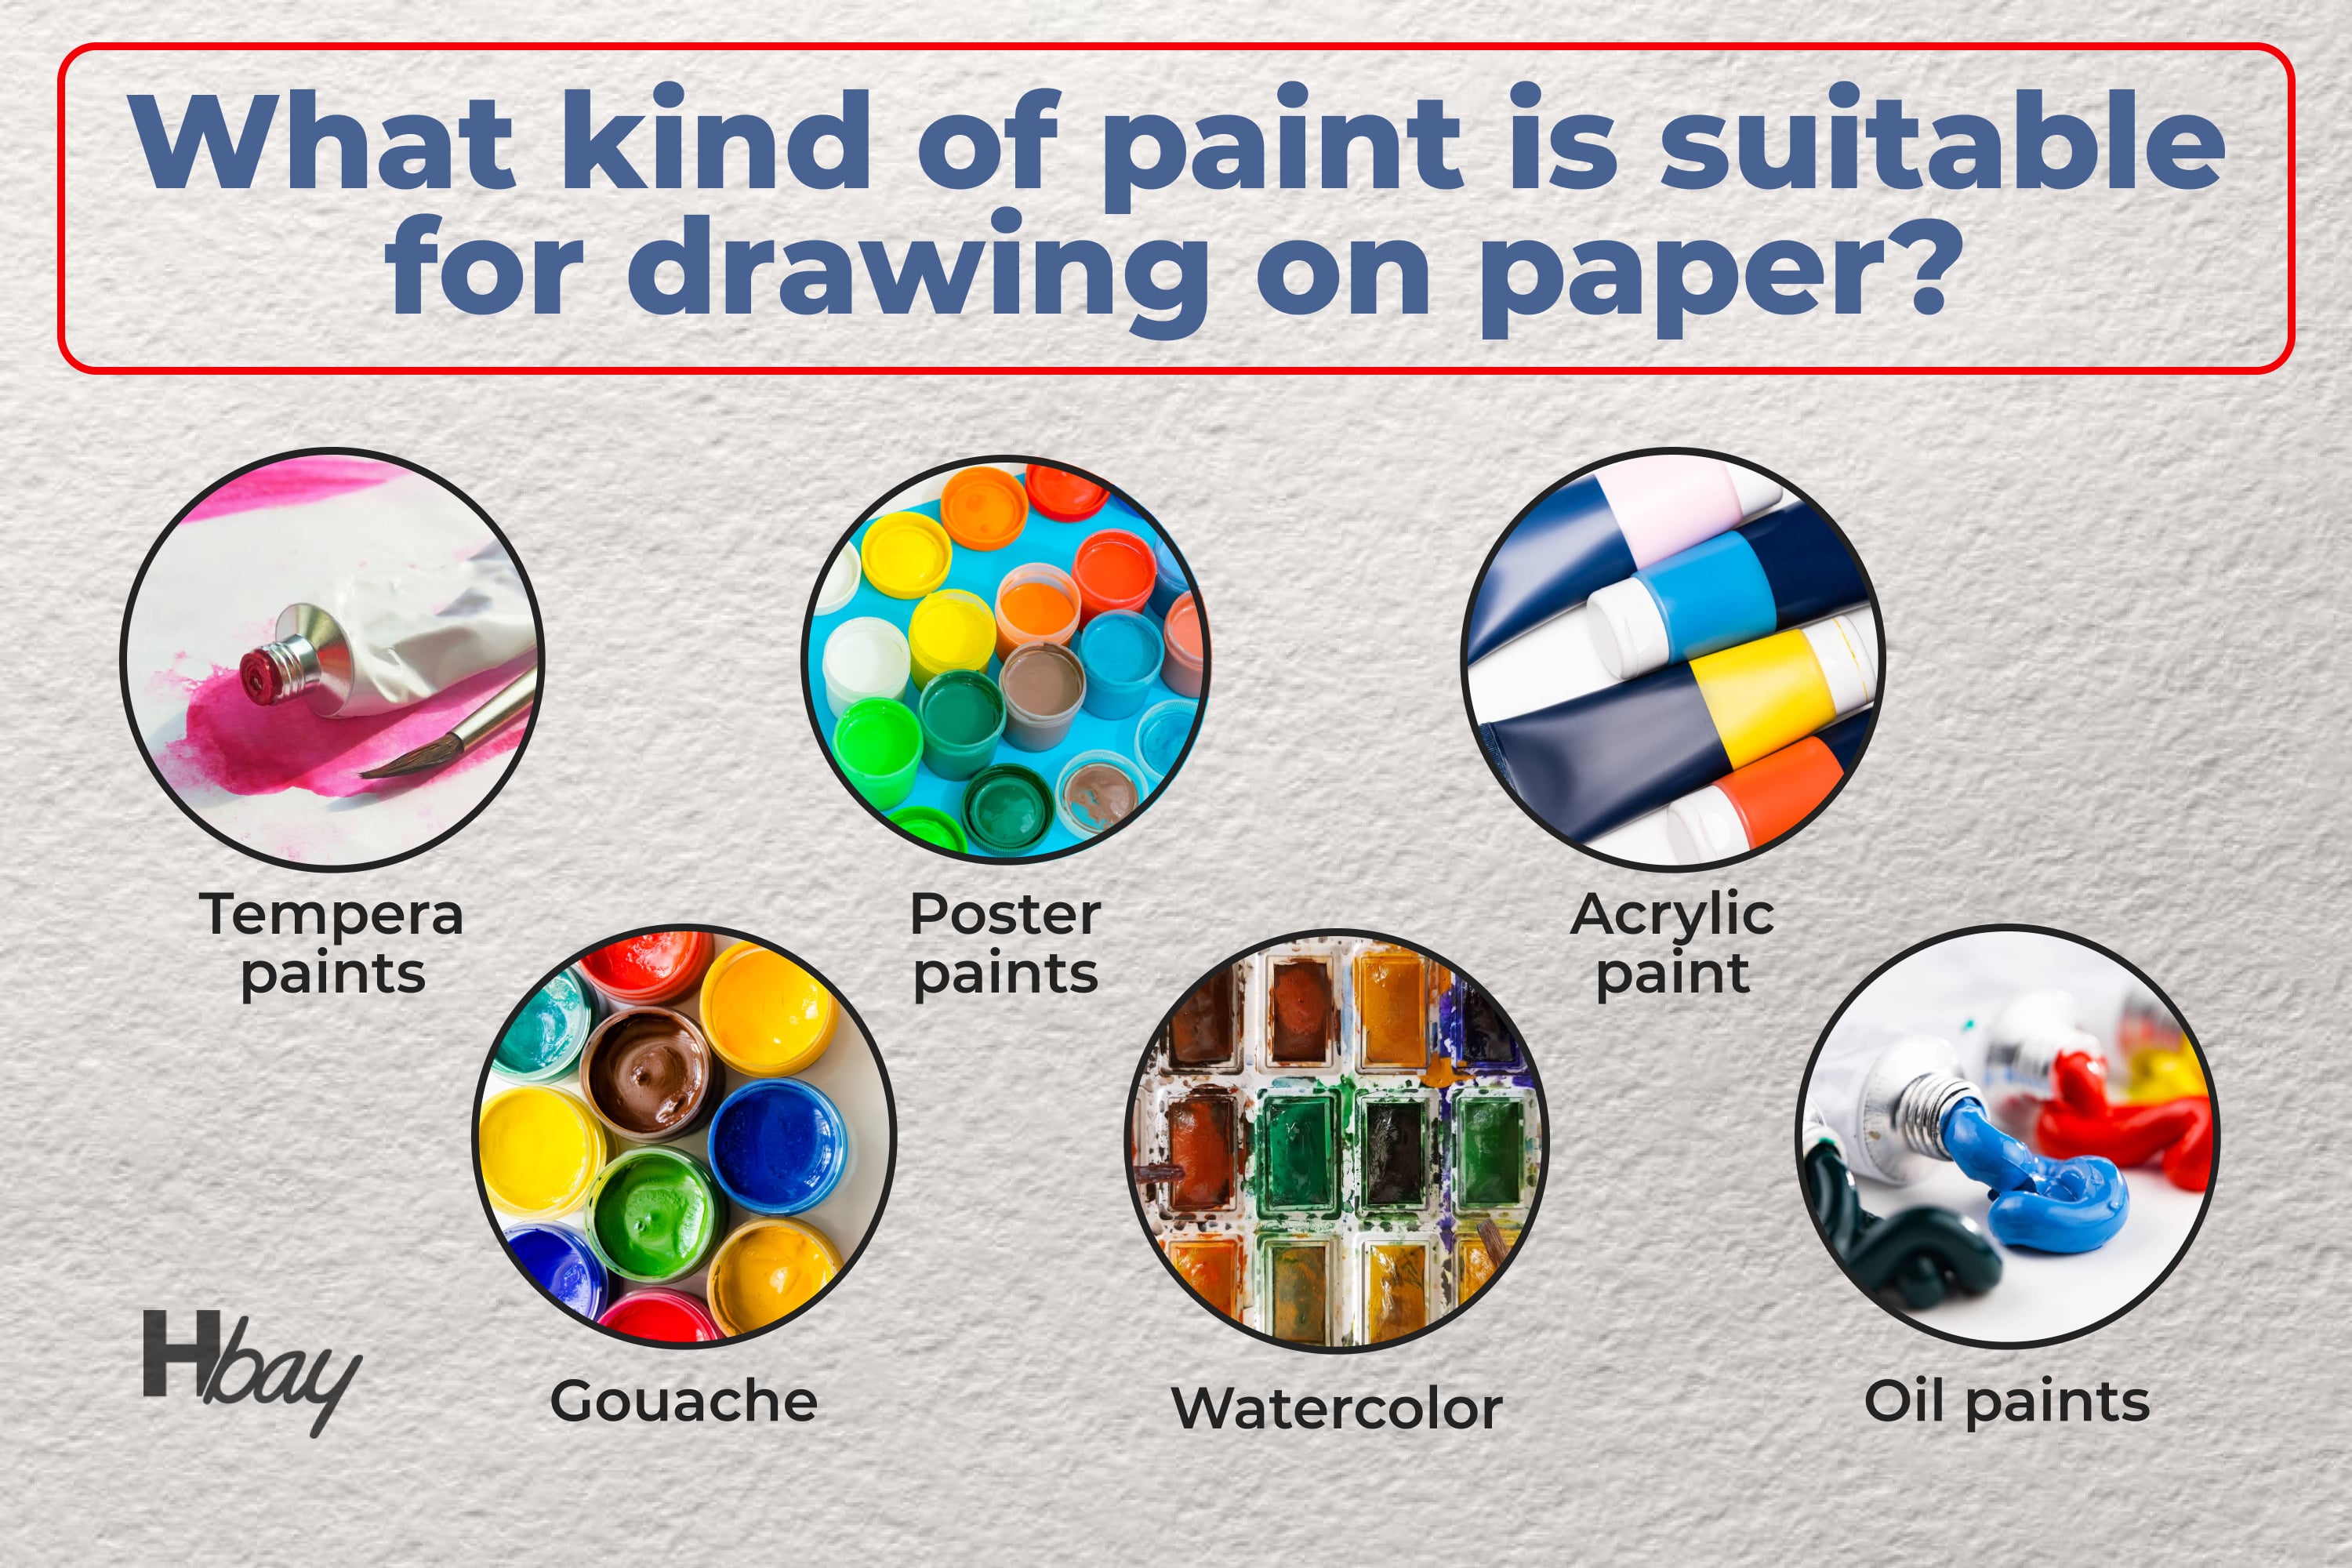 What kind of paint is suitable for drawing on paper